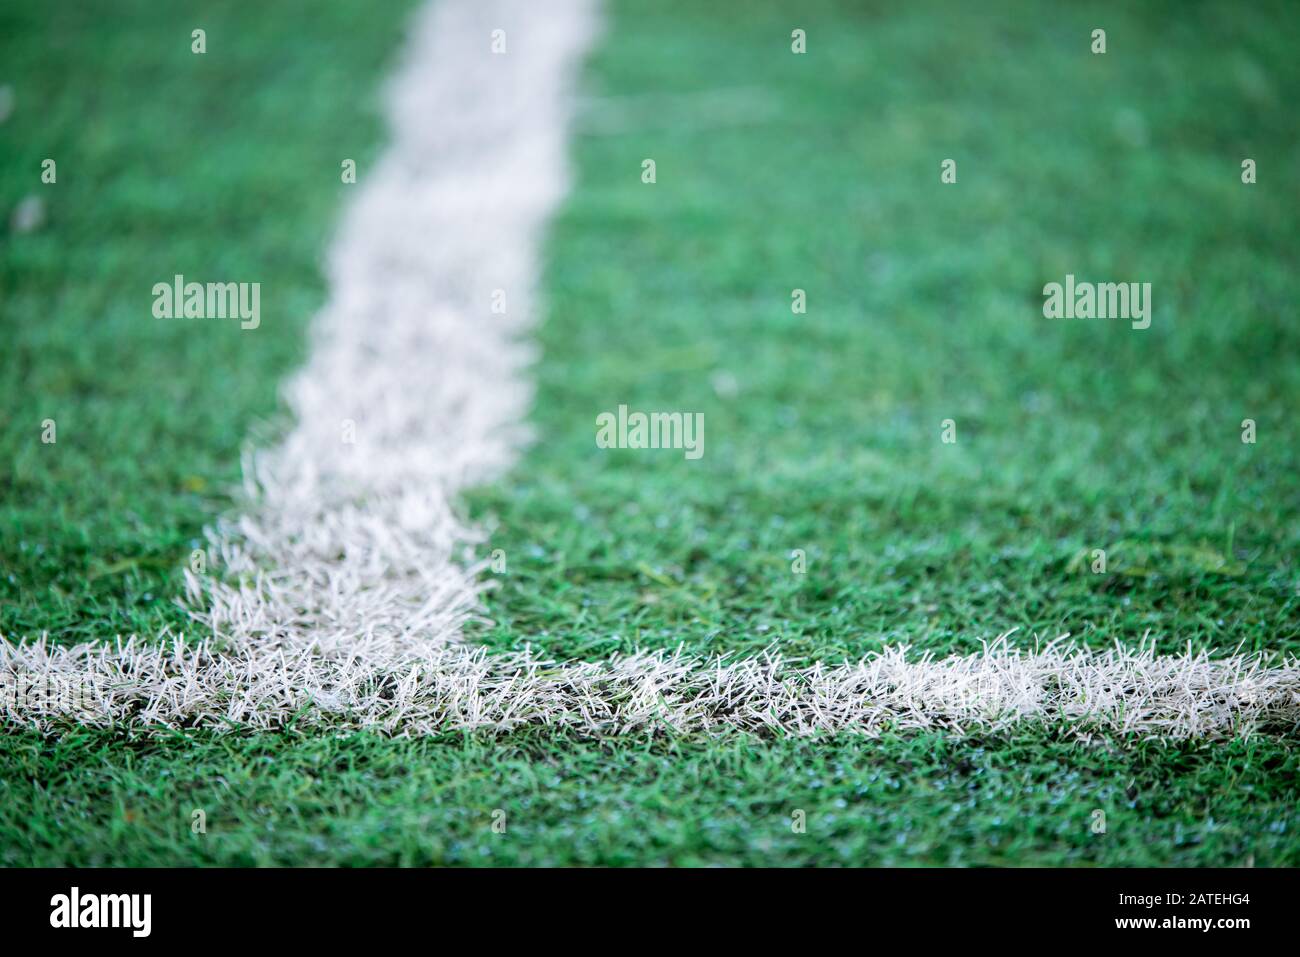 Football field with white line Stock Photo